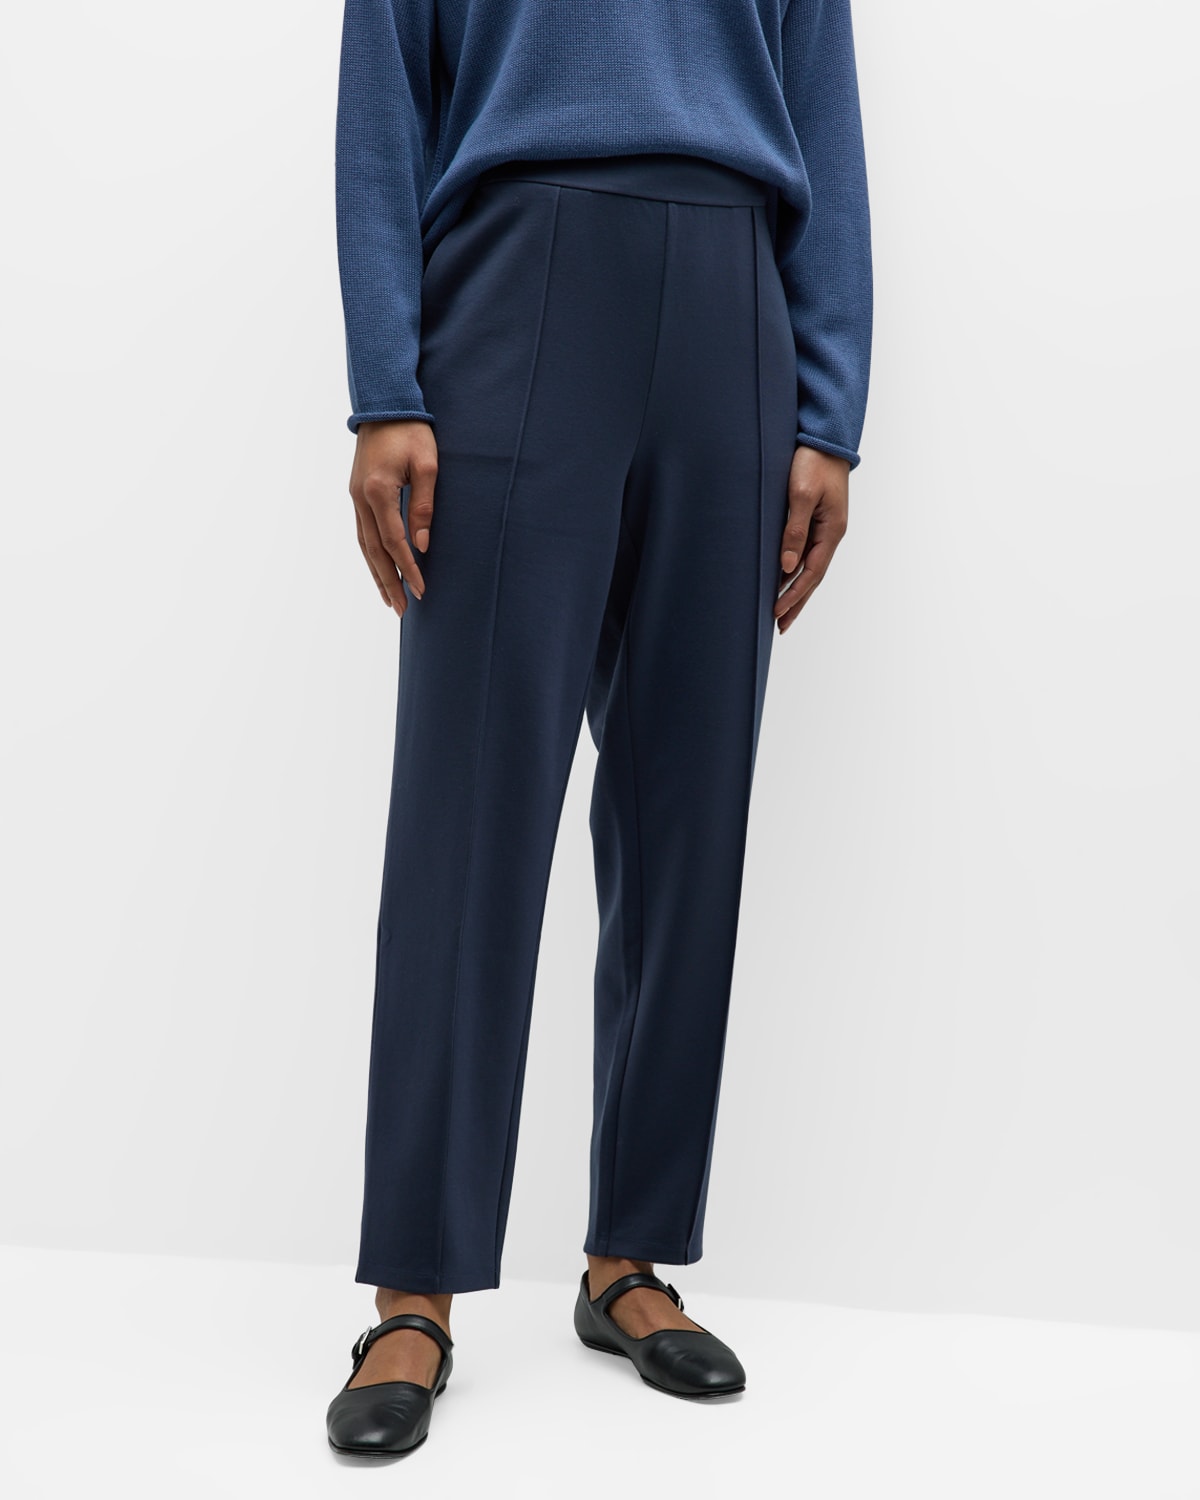 EILEEN FISHER PETITE TAPERED PINTUCK FLEX PONTE ANKLE PANTS